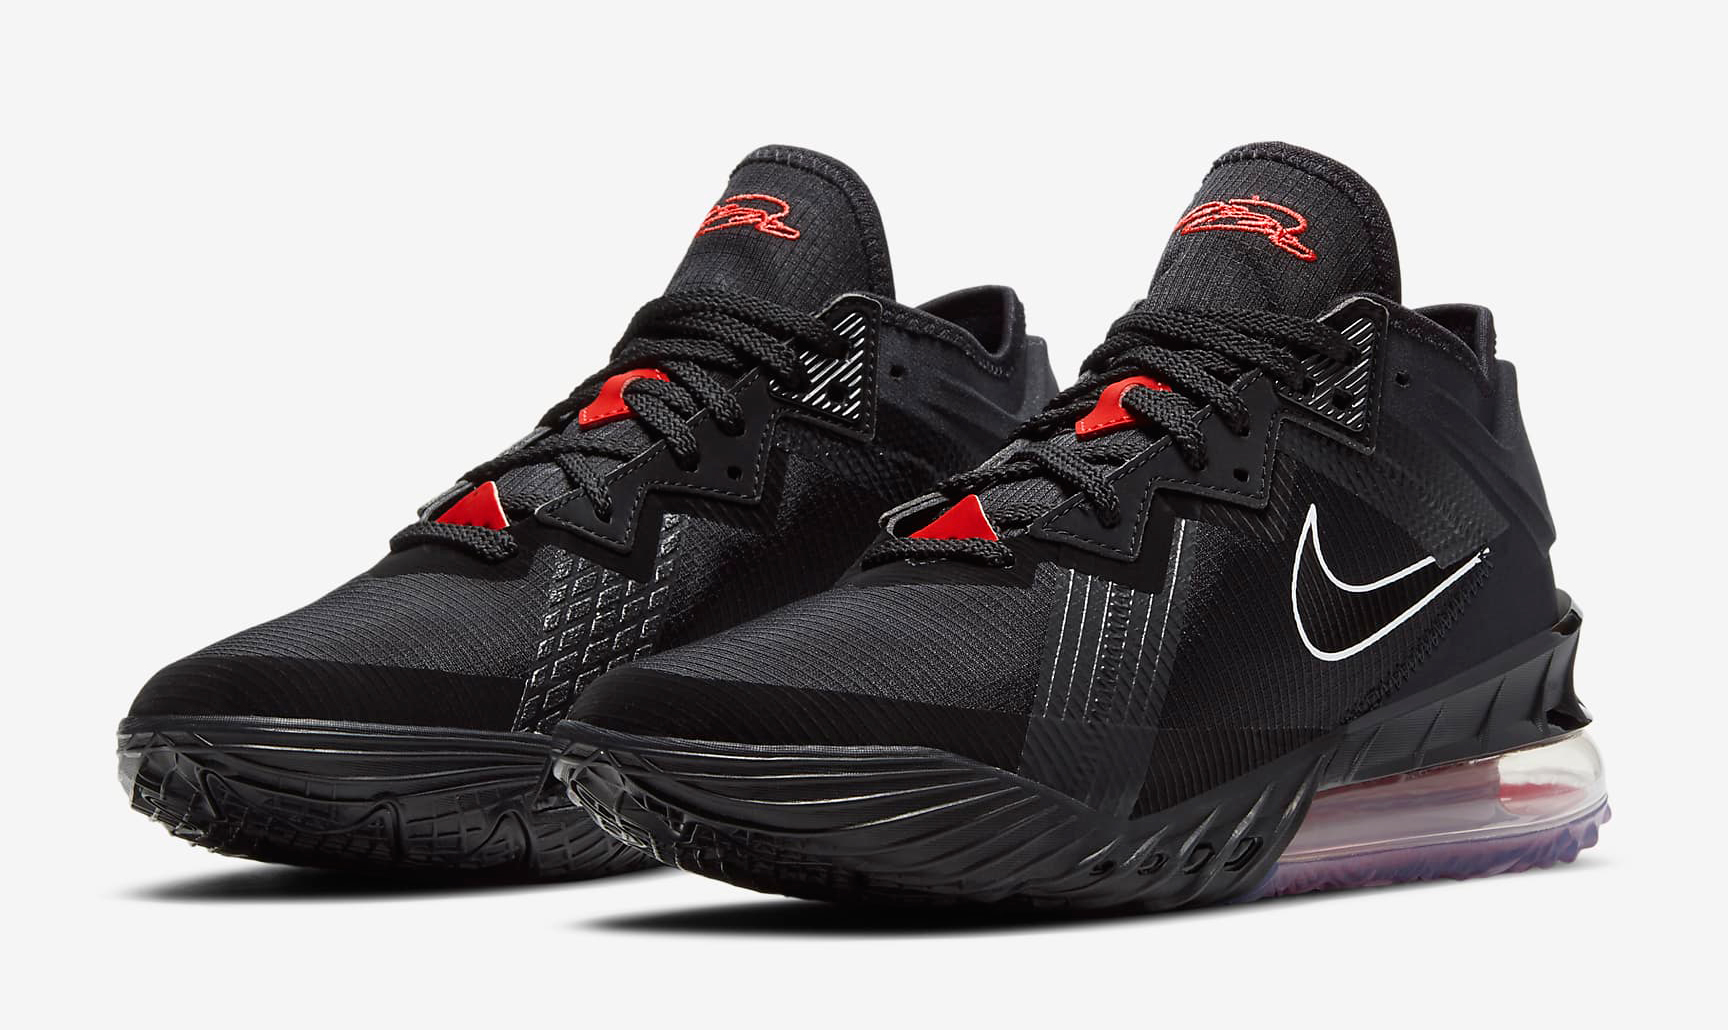 nike-lebron-18-low-bred-black-university-red-release-date-price-where-to-buy-1